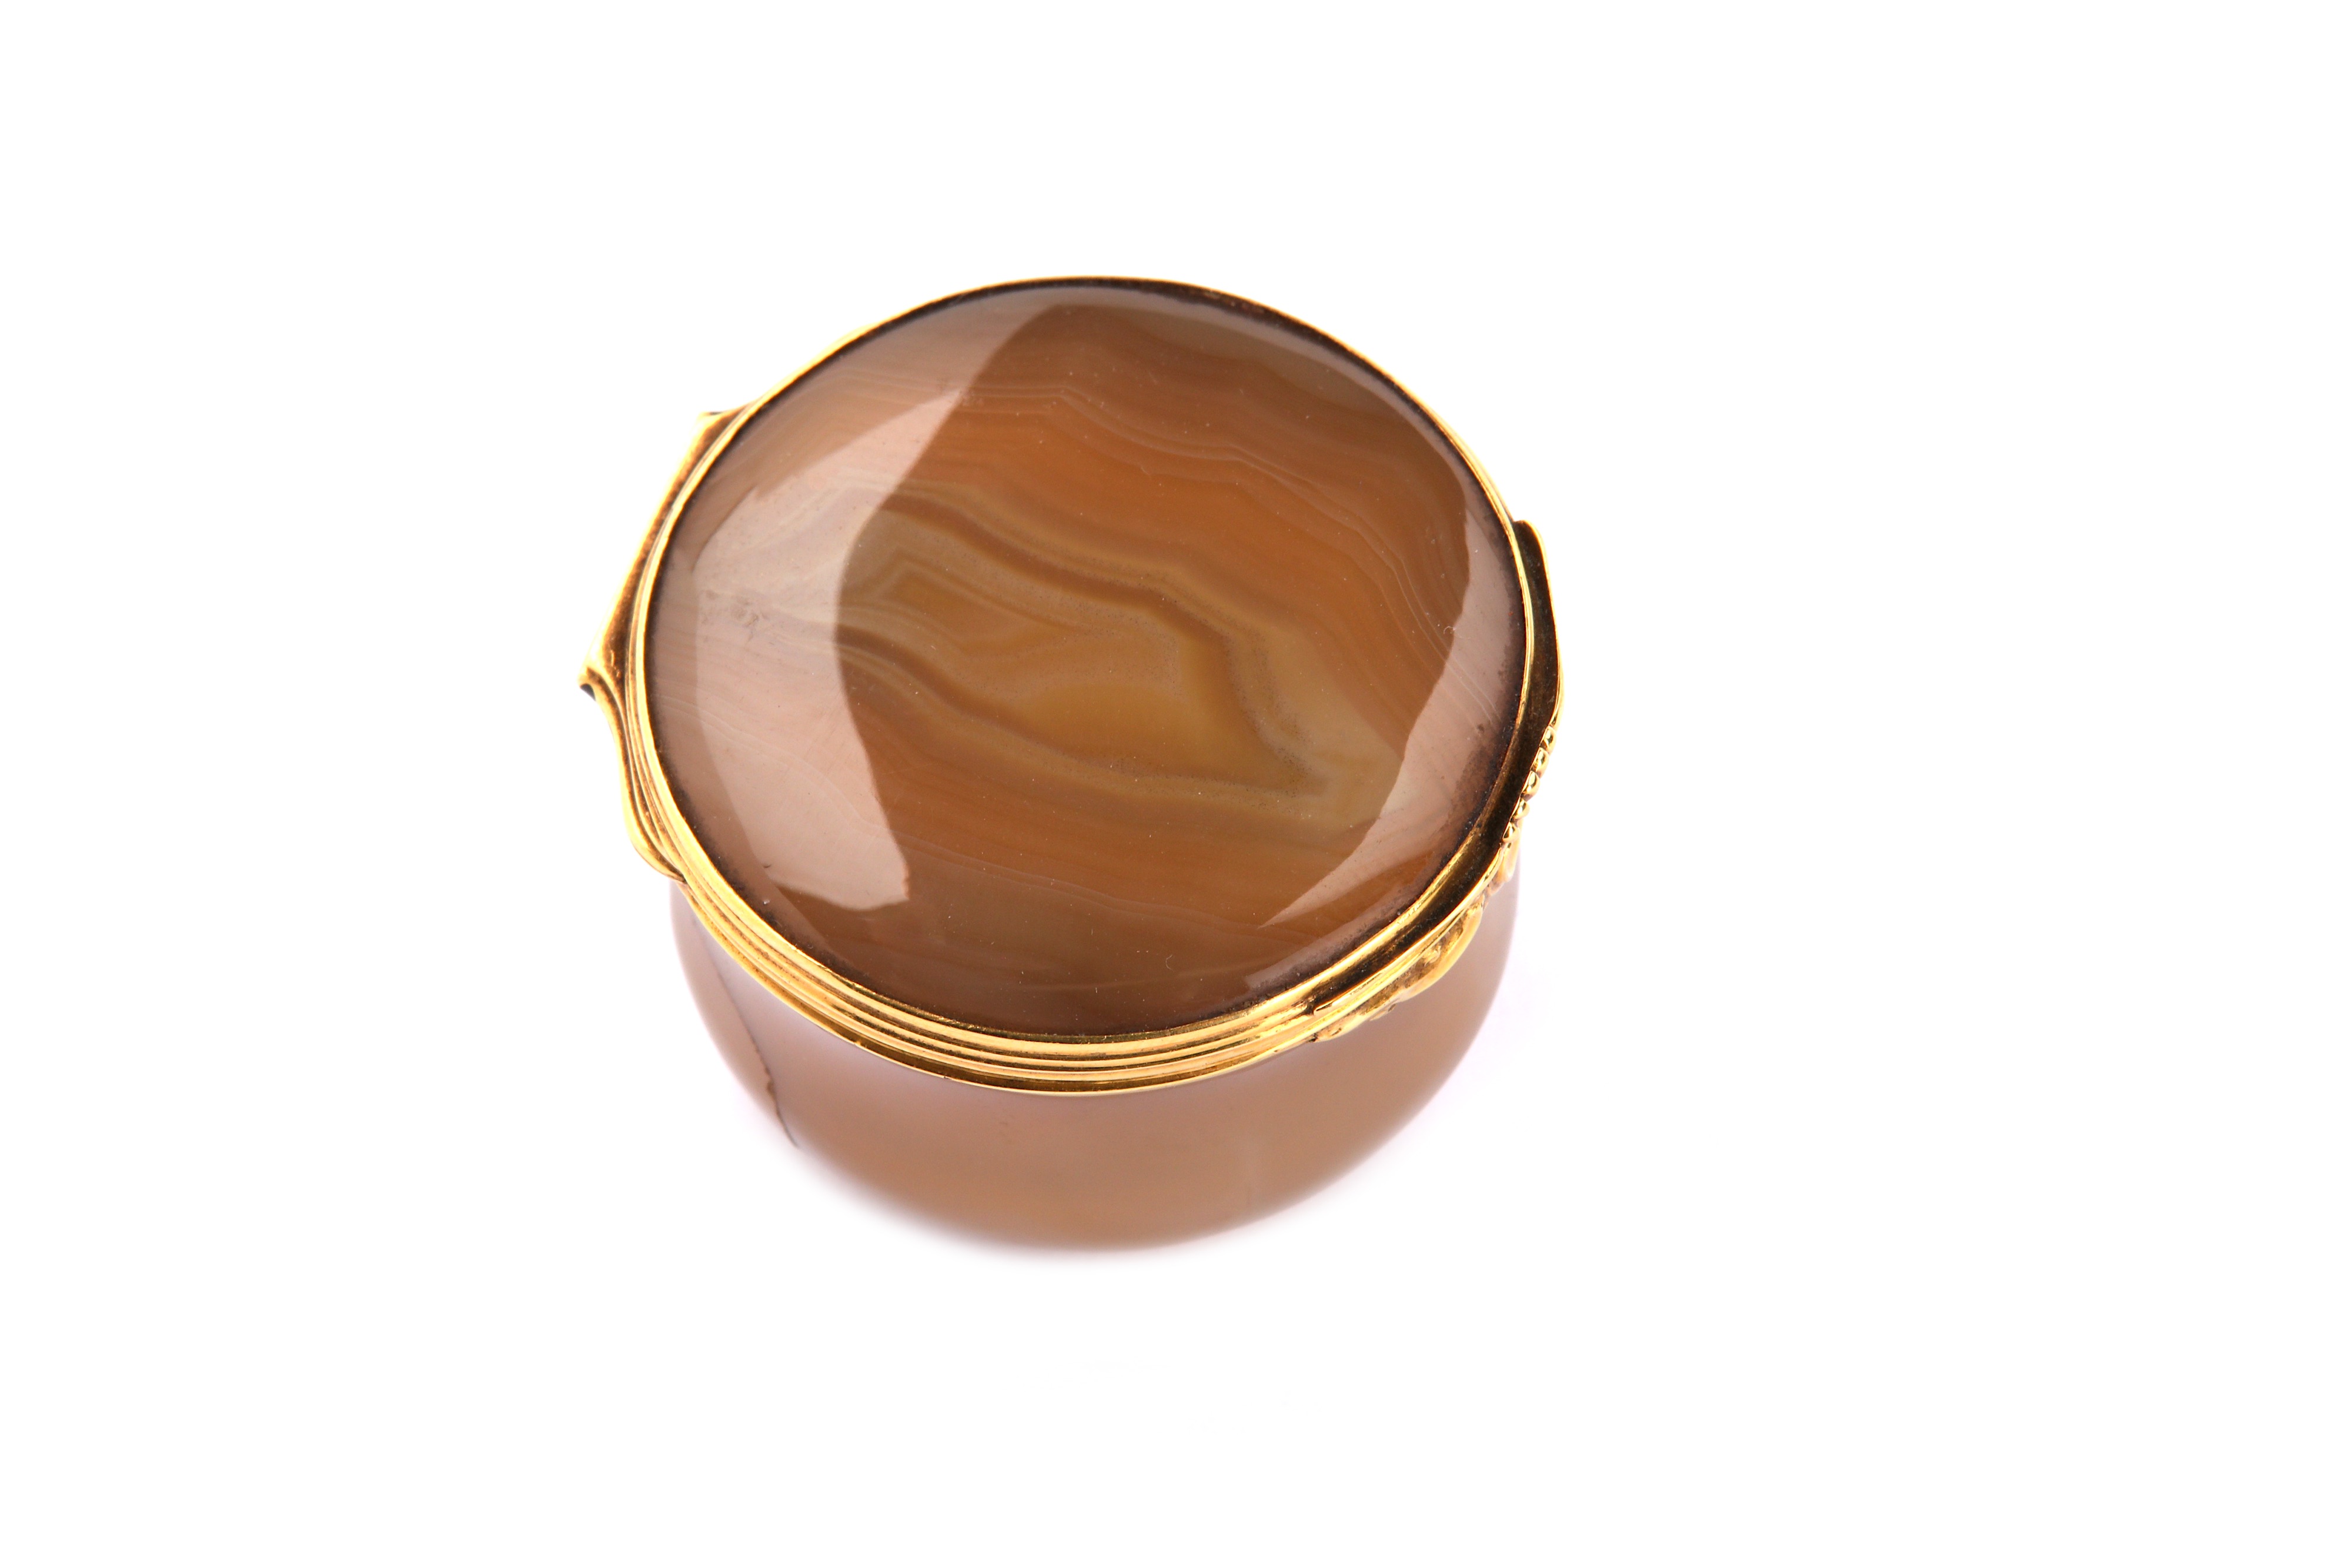 A George II unmarked gold mounted agate snuff box, English circa 1750-60 - Image 3 of 3